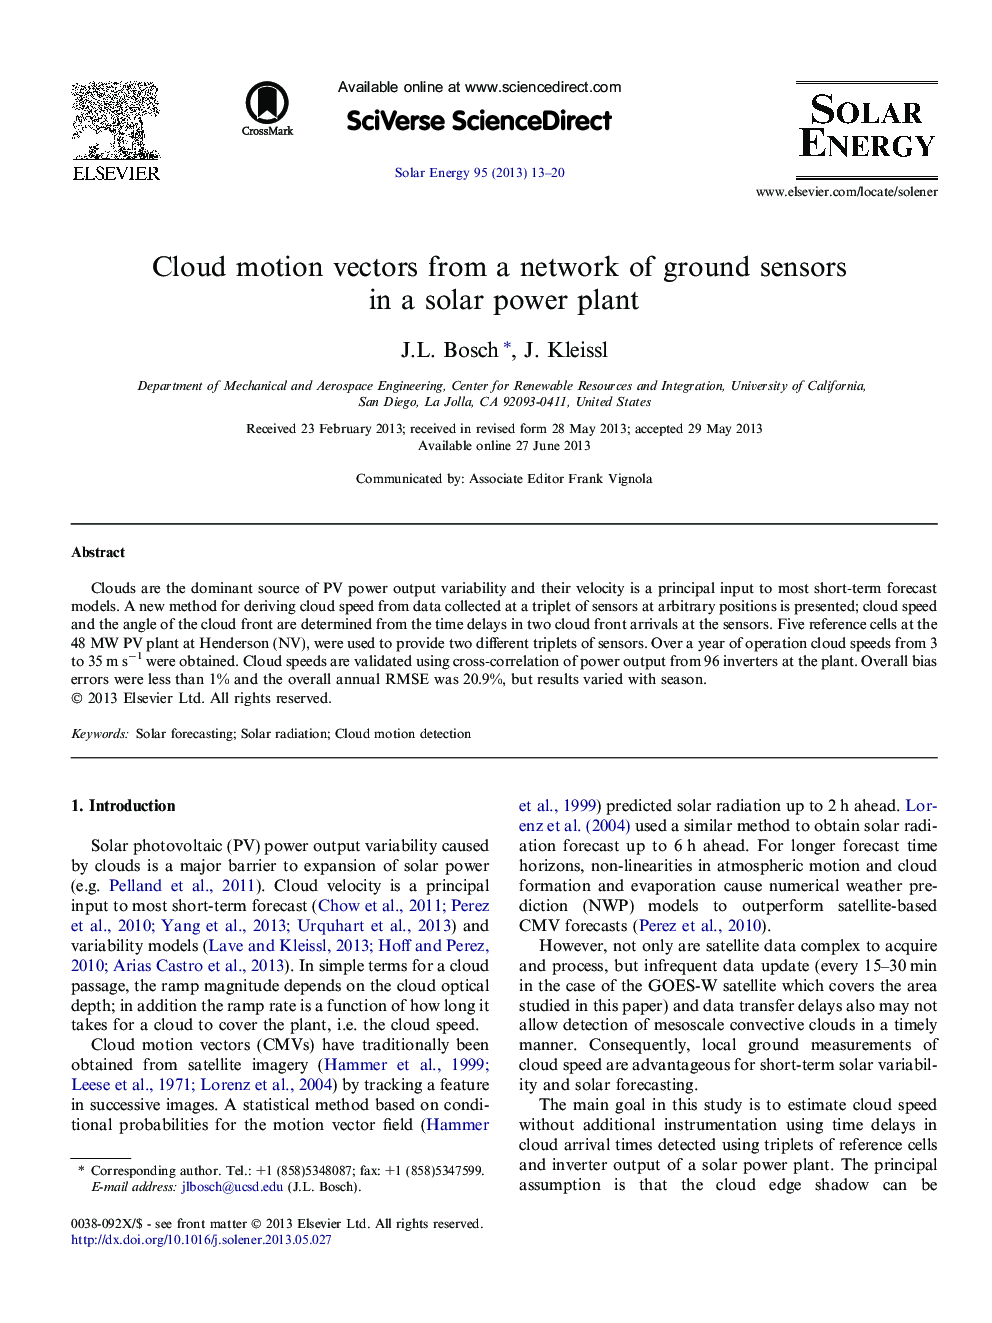 Cloud motion vectors from a network of ground sensors in a solar power plant